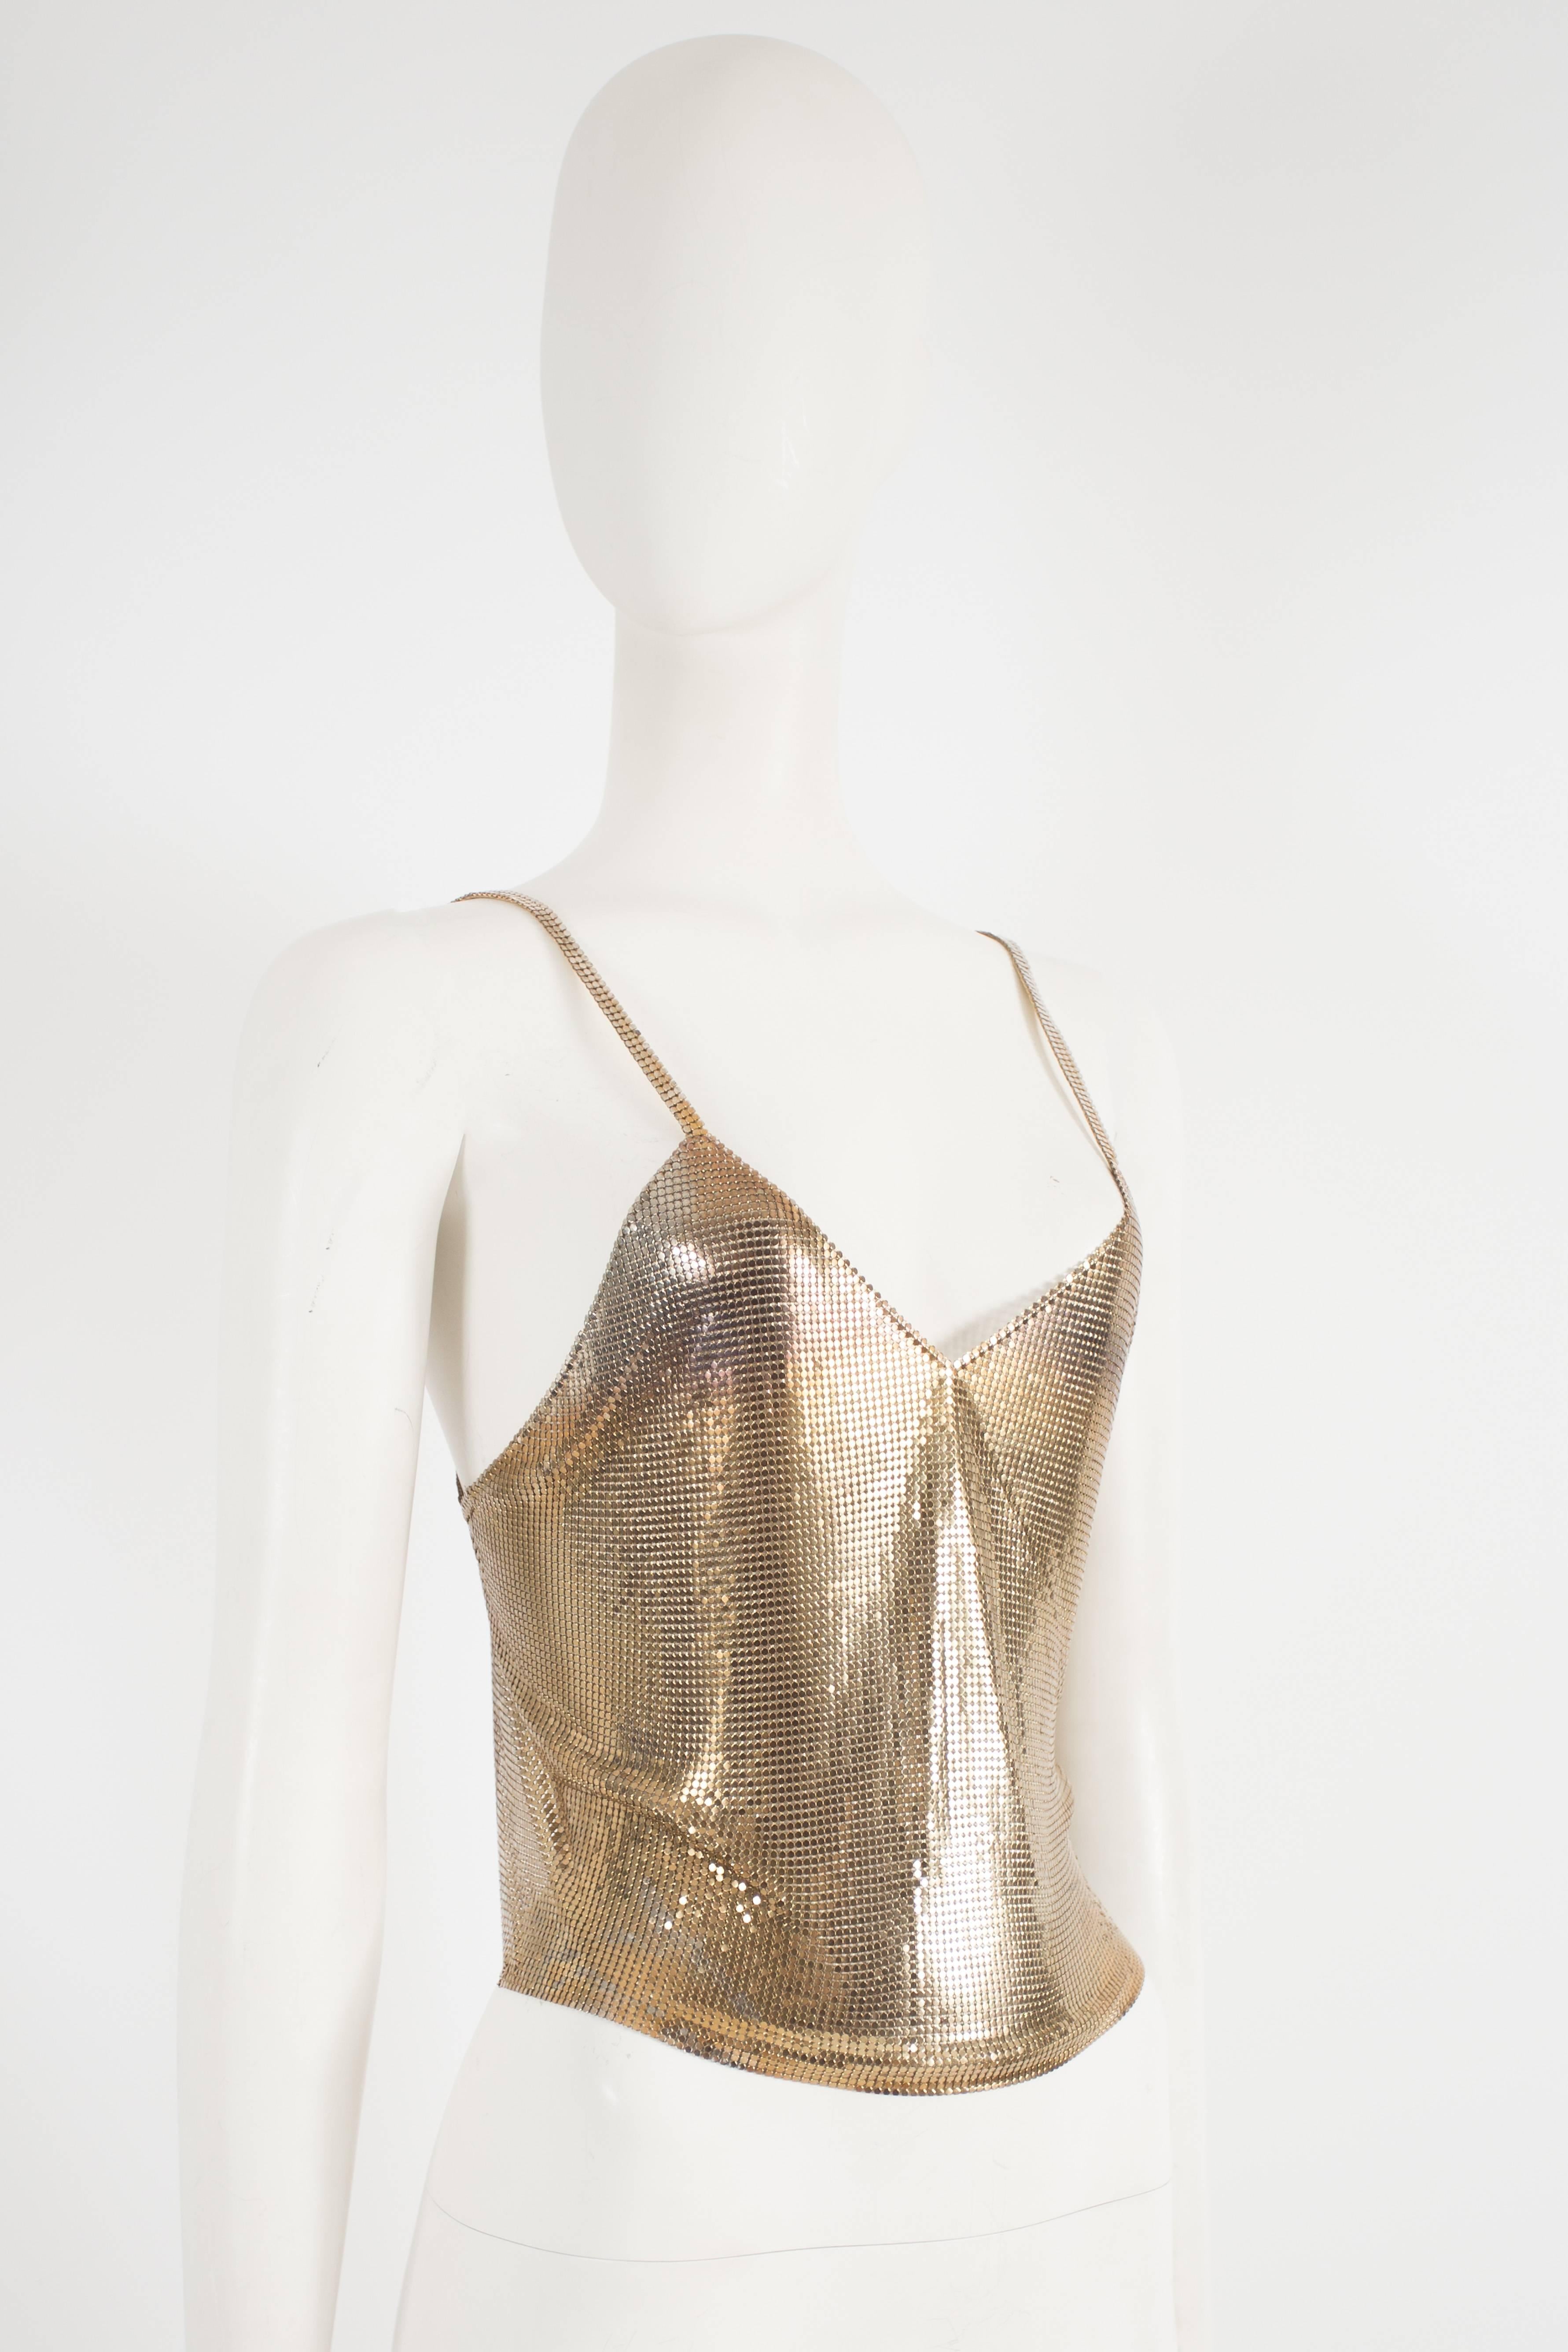 Rare Paco Rabbane gold chainmail evening vest, circa 1968. Constructed in the gold-tone chainmail, featuring an open back, two spaghetti straps, lobster clasp with adjustable length chain and original Paco Rabanne tag.